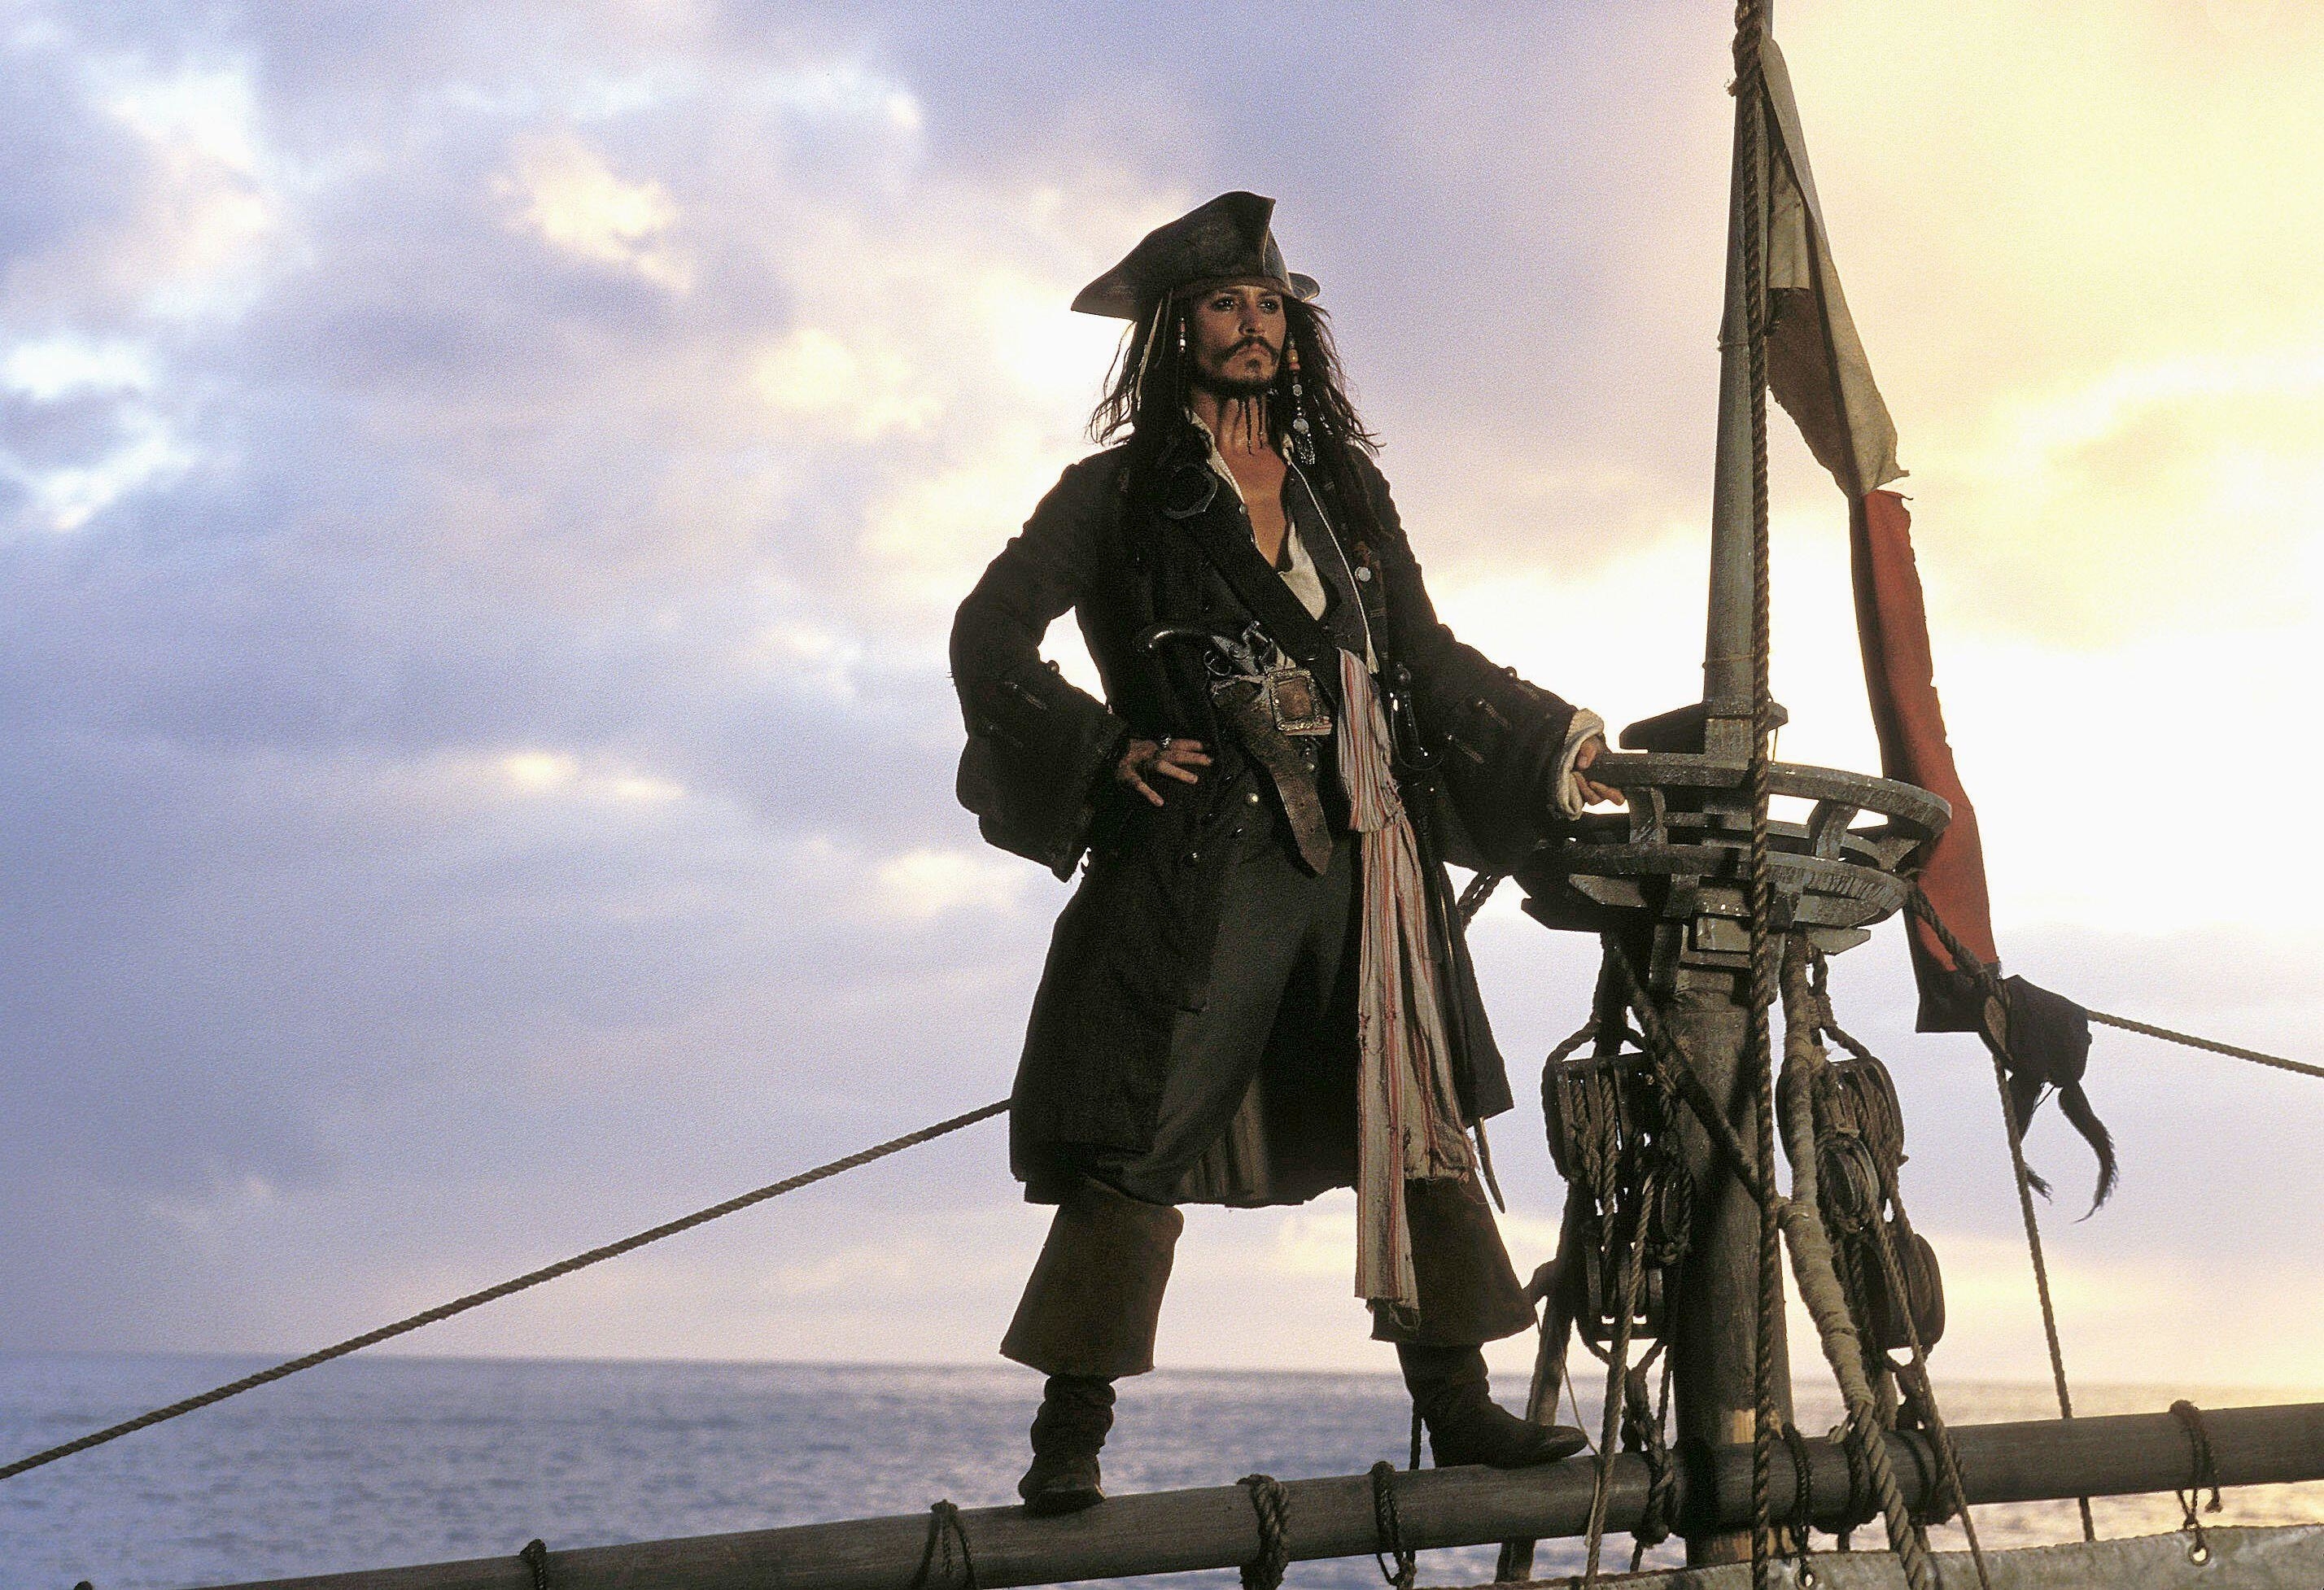 Johnny Depp standing on a ship looking at the ocean in Pirates of the Caribbean: The Curse of the Black